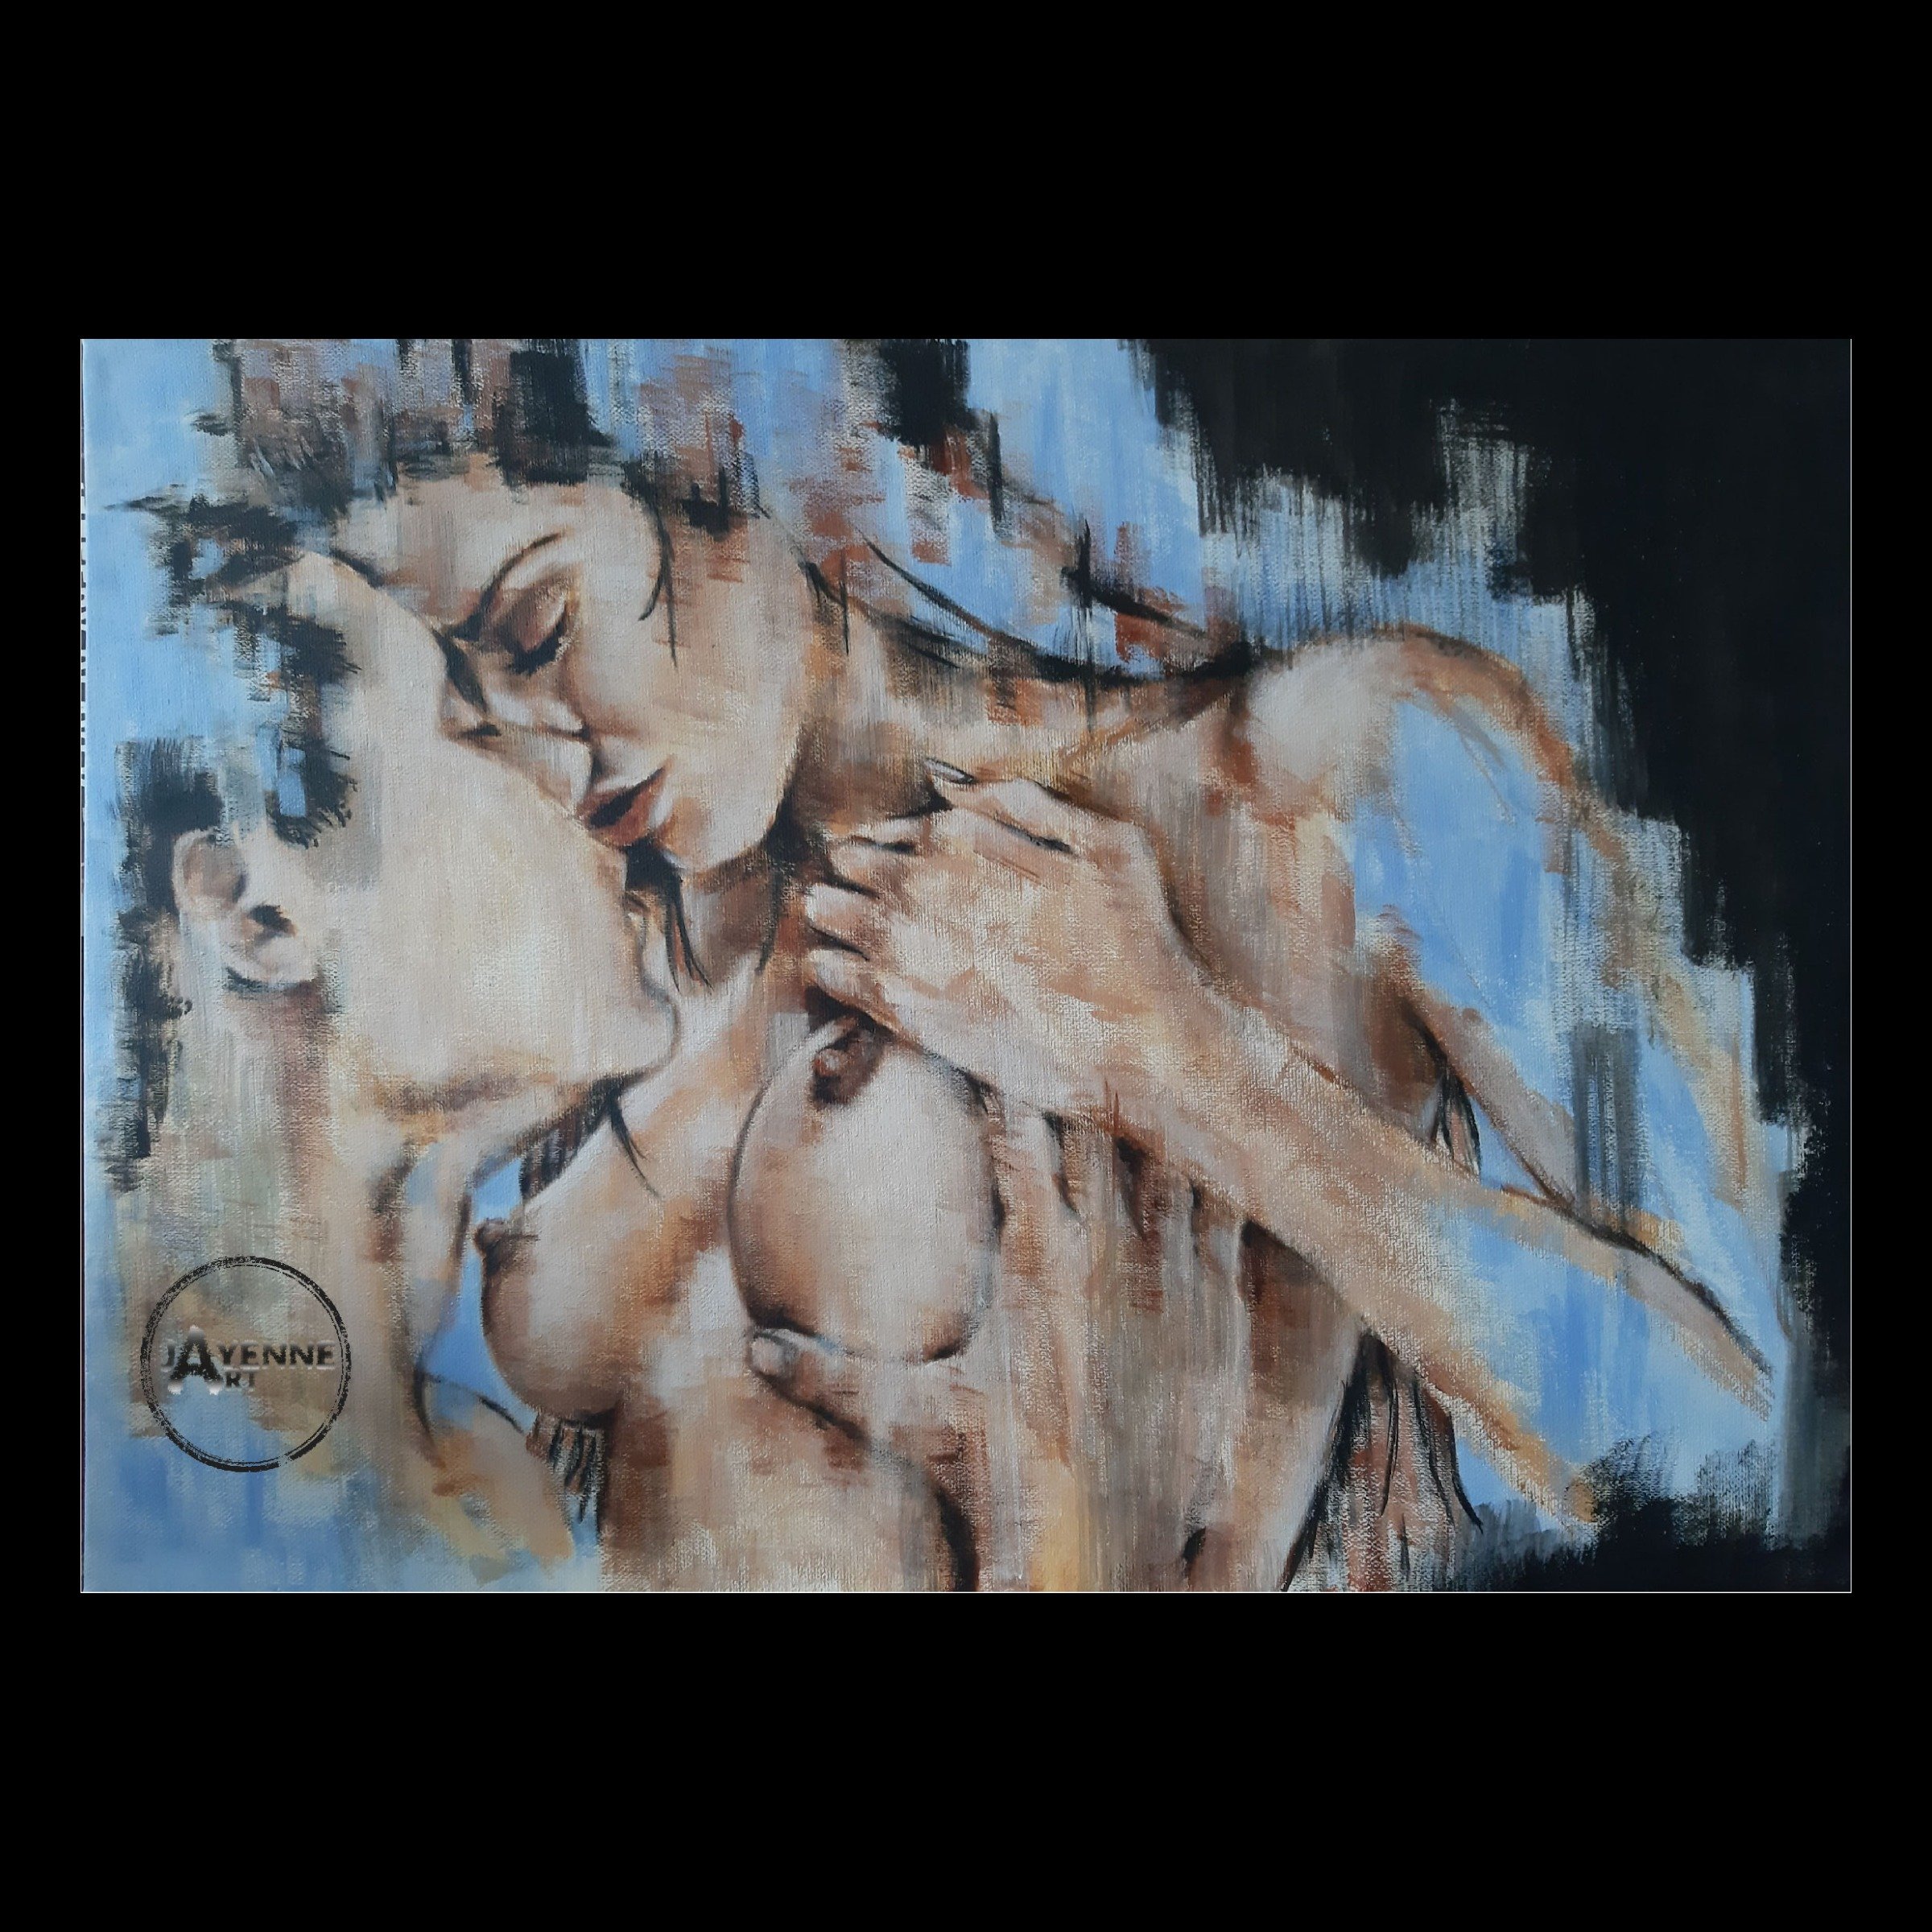 James Nisbet; Untitled Erotic 12, 2019, Original Painting Acrylic, 60 x 40 cm. Artwork description: 241 I always try to create energy in my paintings.  I knew this image would work well for my style...